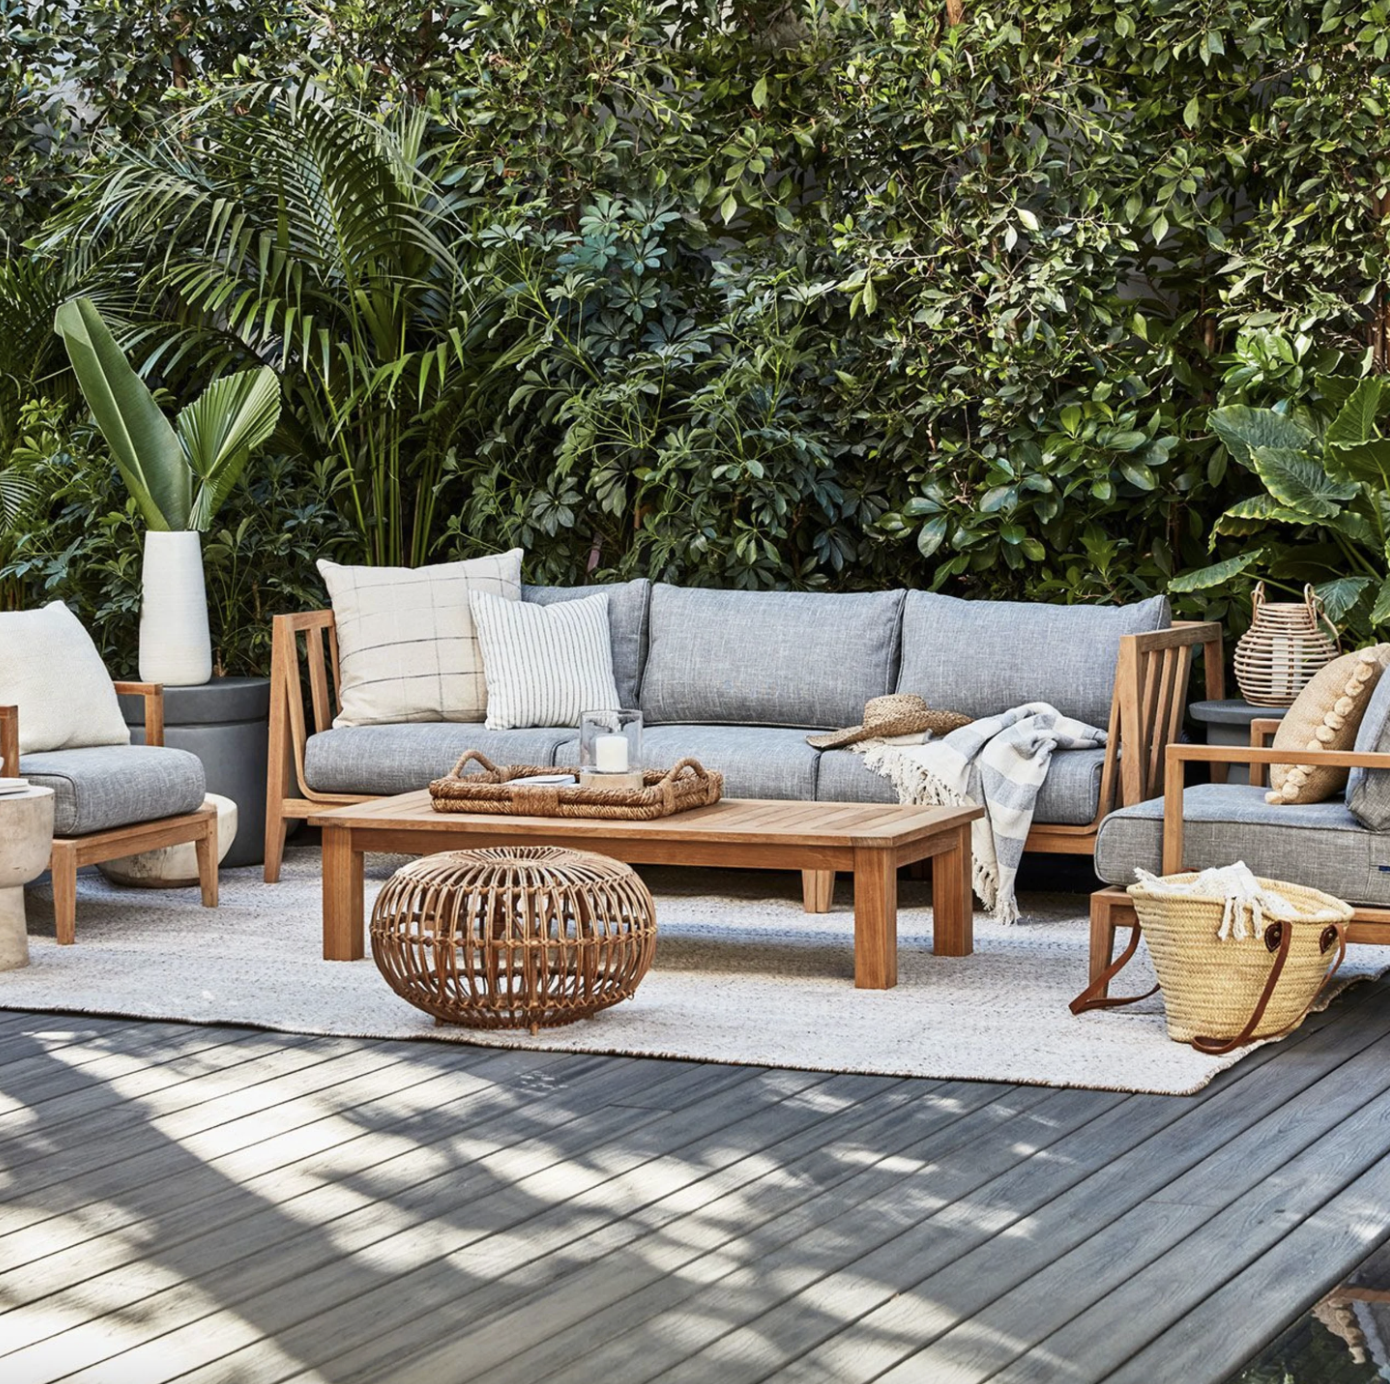 You Can Get 30% Off Outer's Quality Outdoor Furniture Right Now